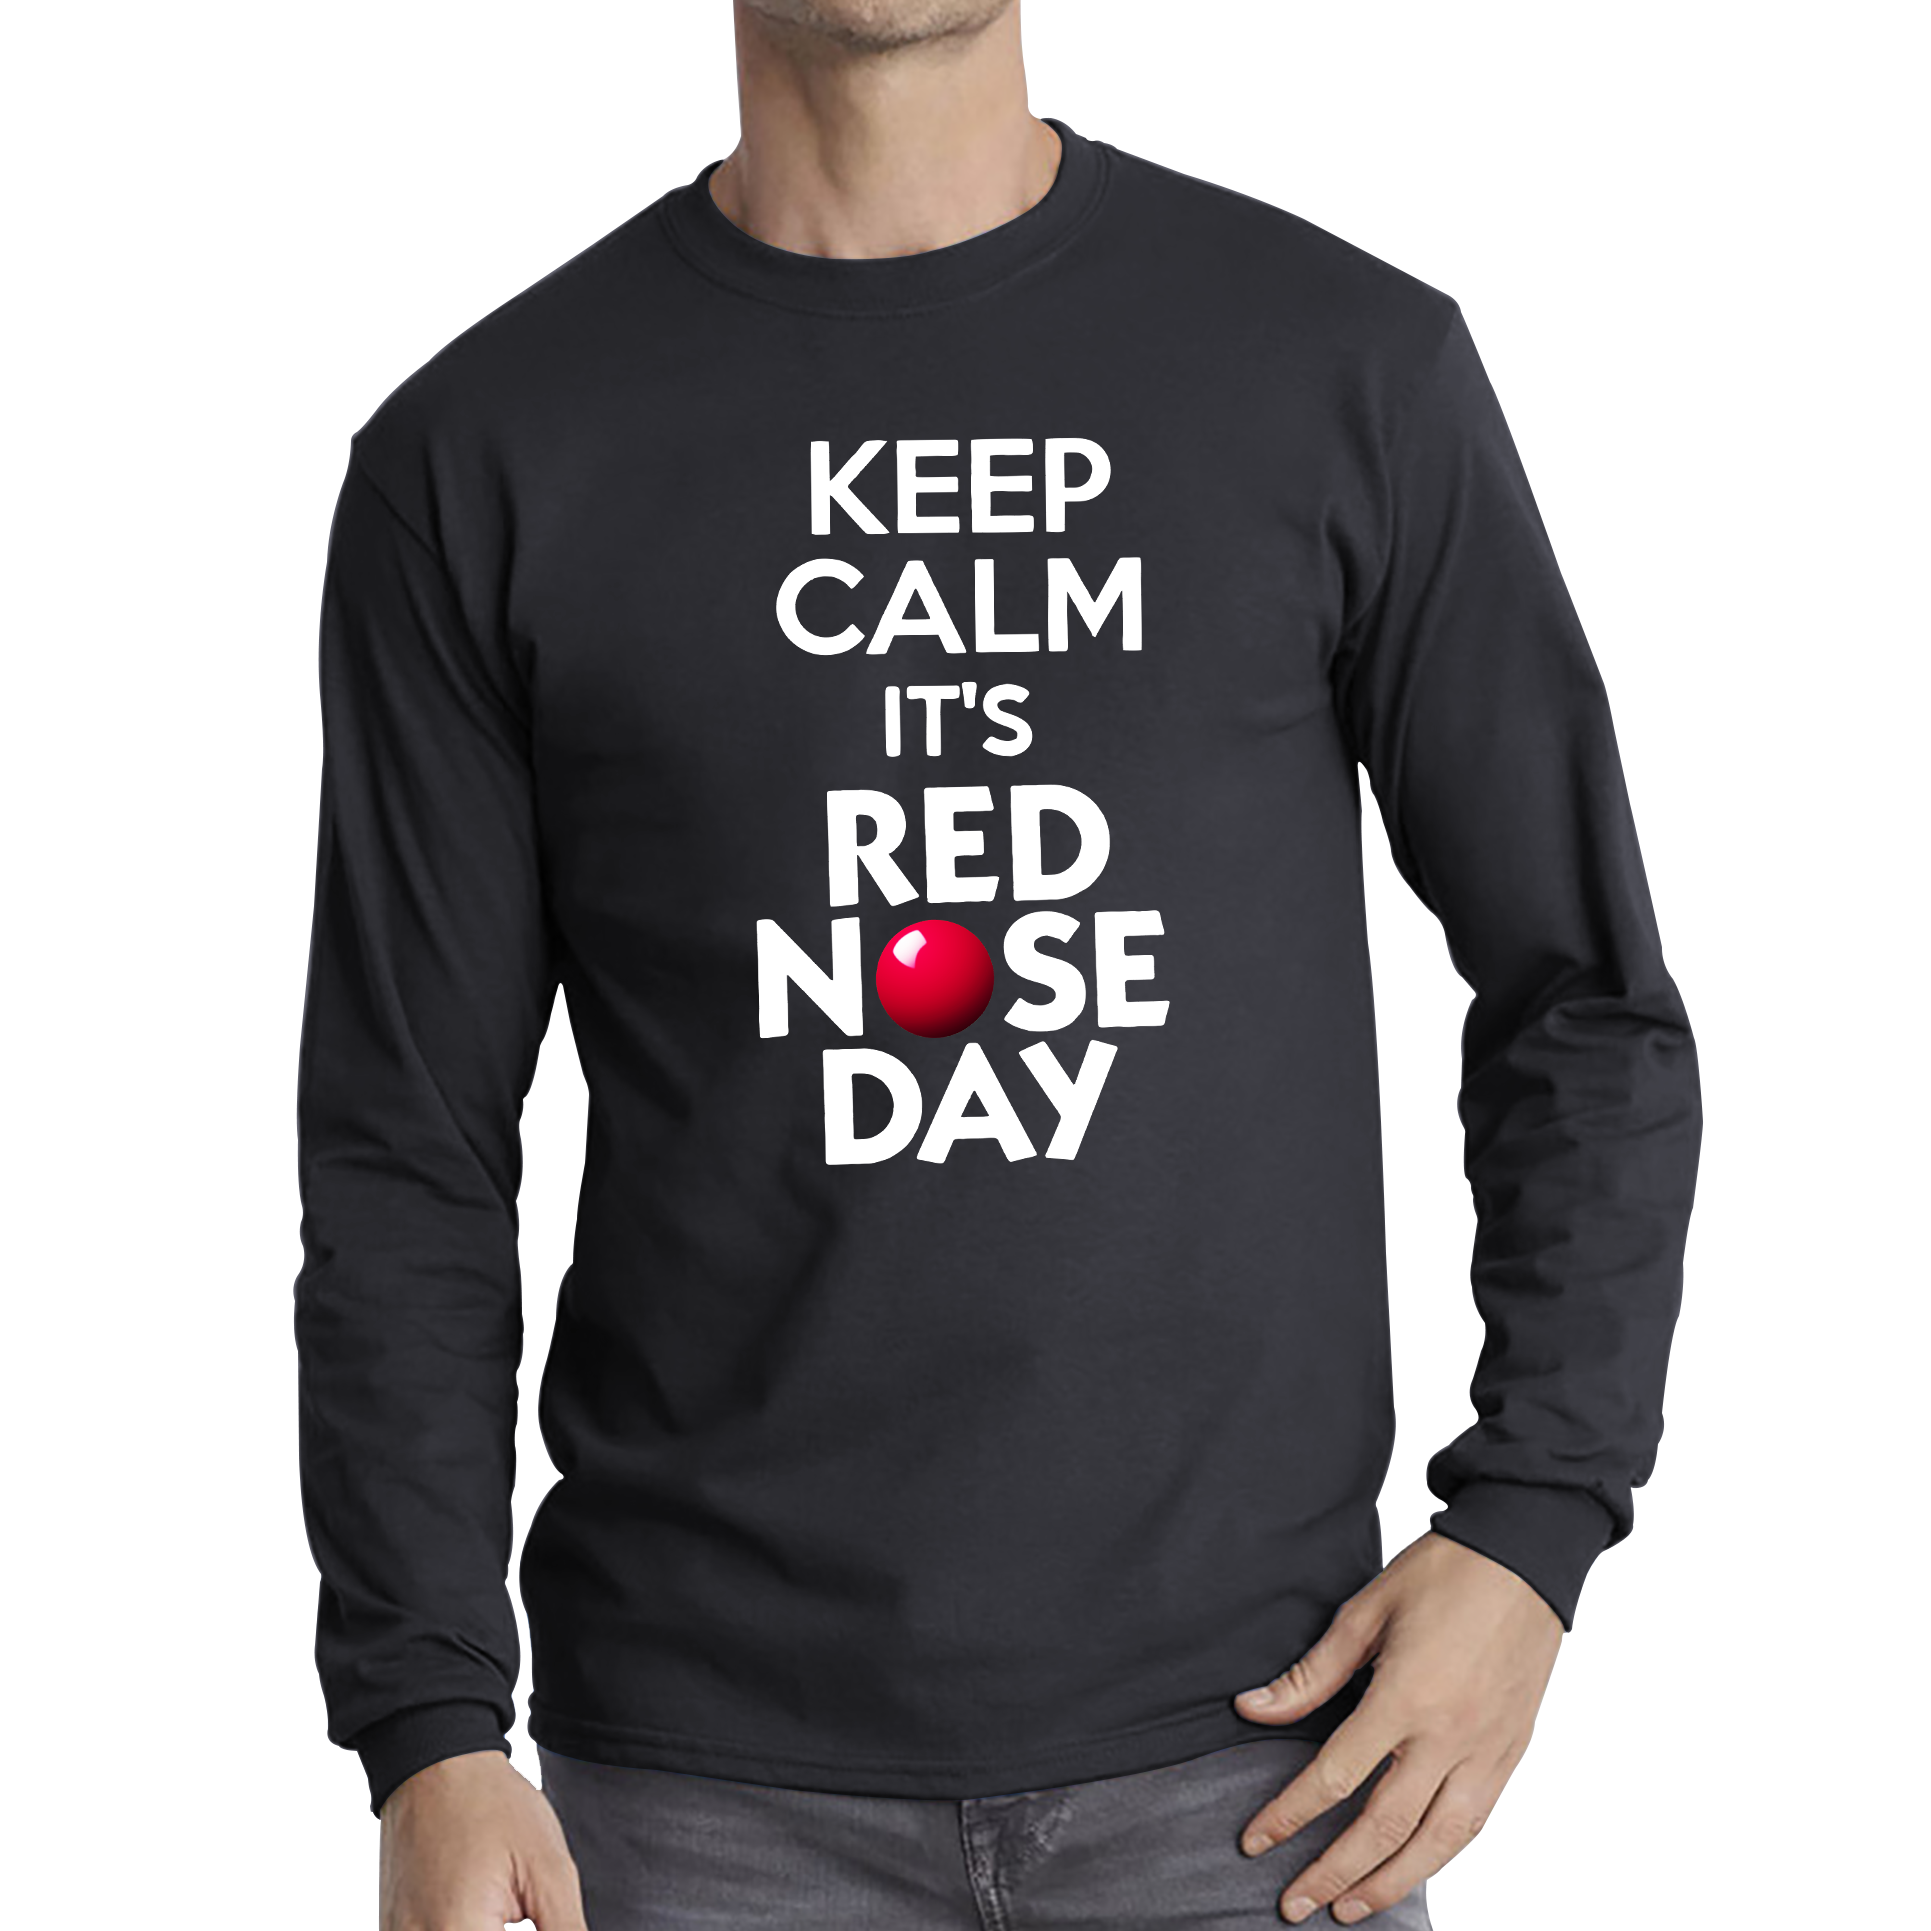 Keep Calm Its Red Nose Day Adult Long Sleeve T Shirt. 50% Goes To Charity